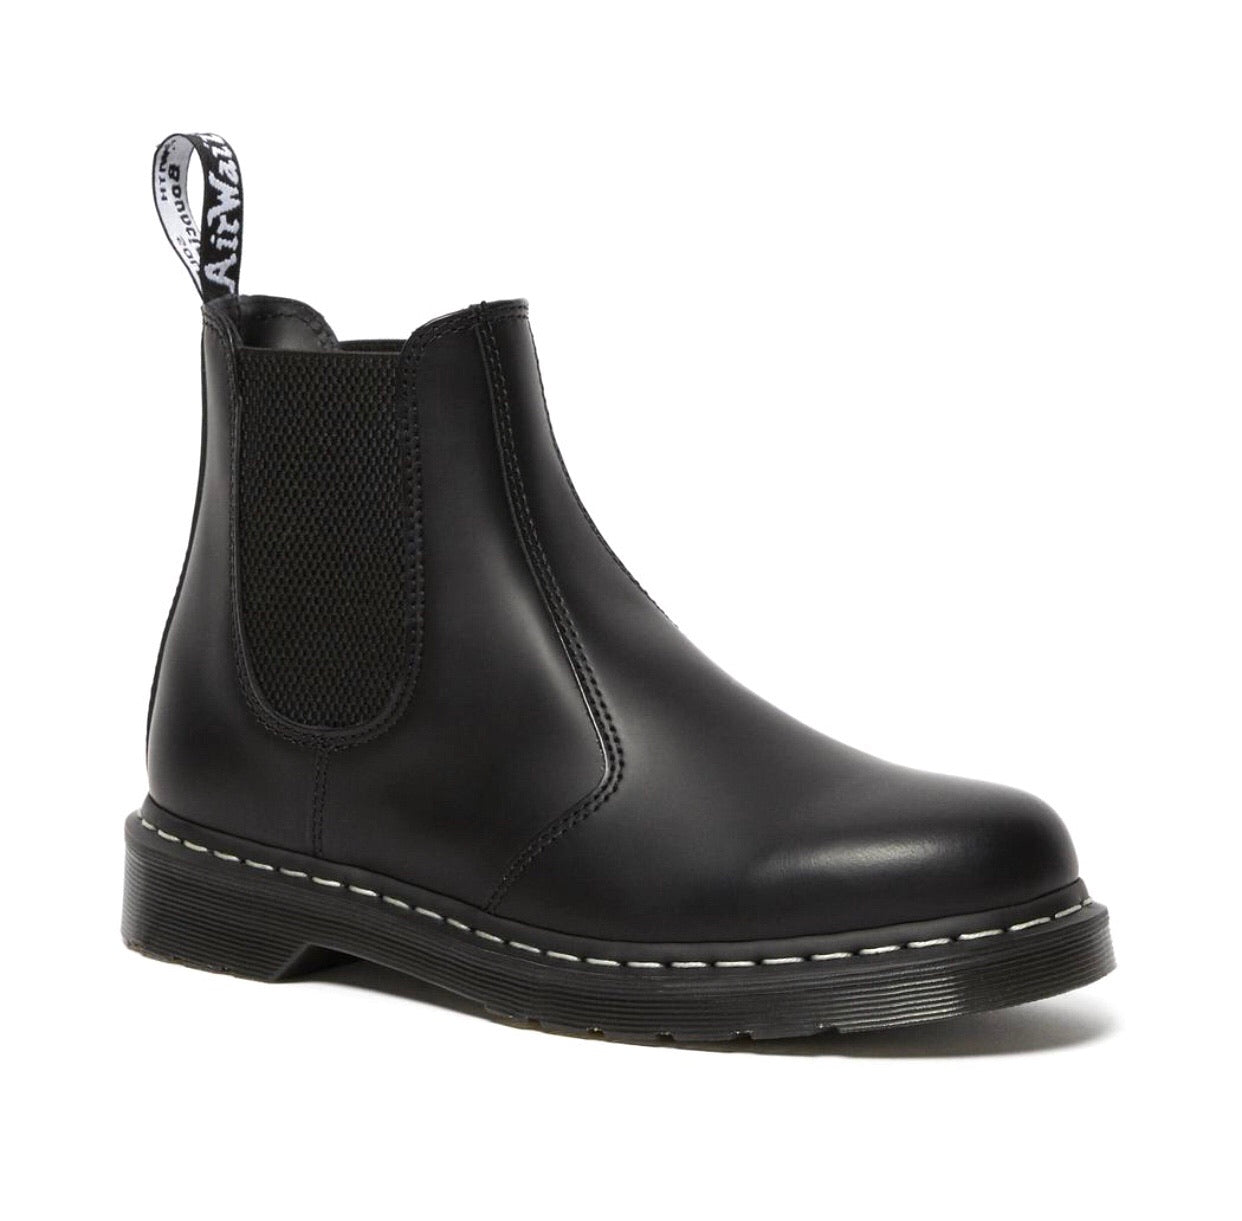 Dr. Martens 2976 Black Smooth White Stitch Chelsea Boot